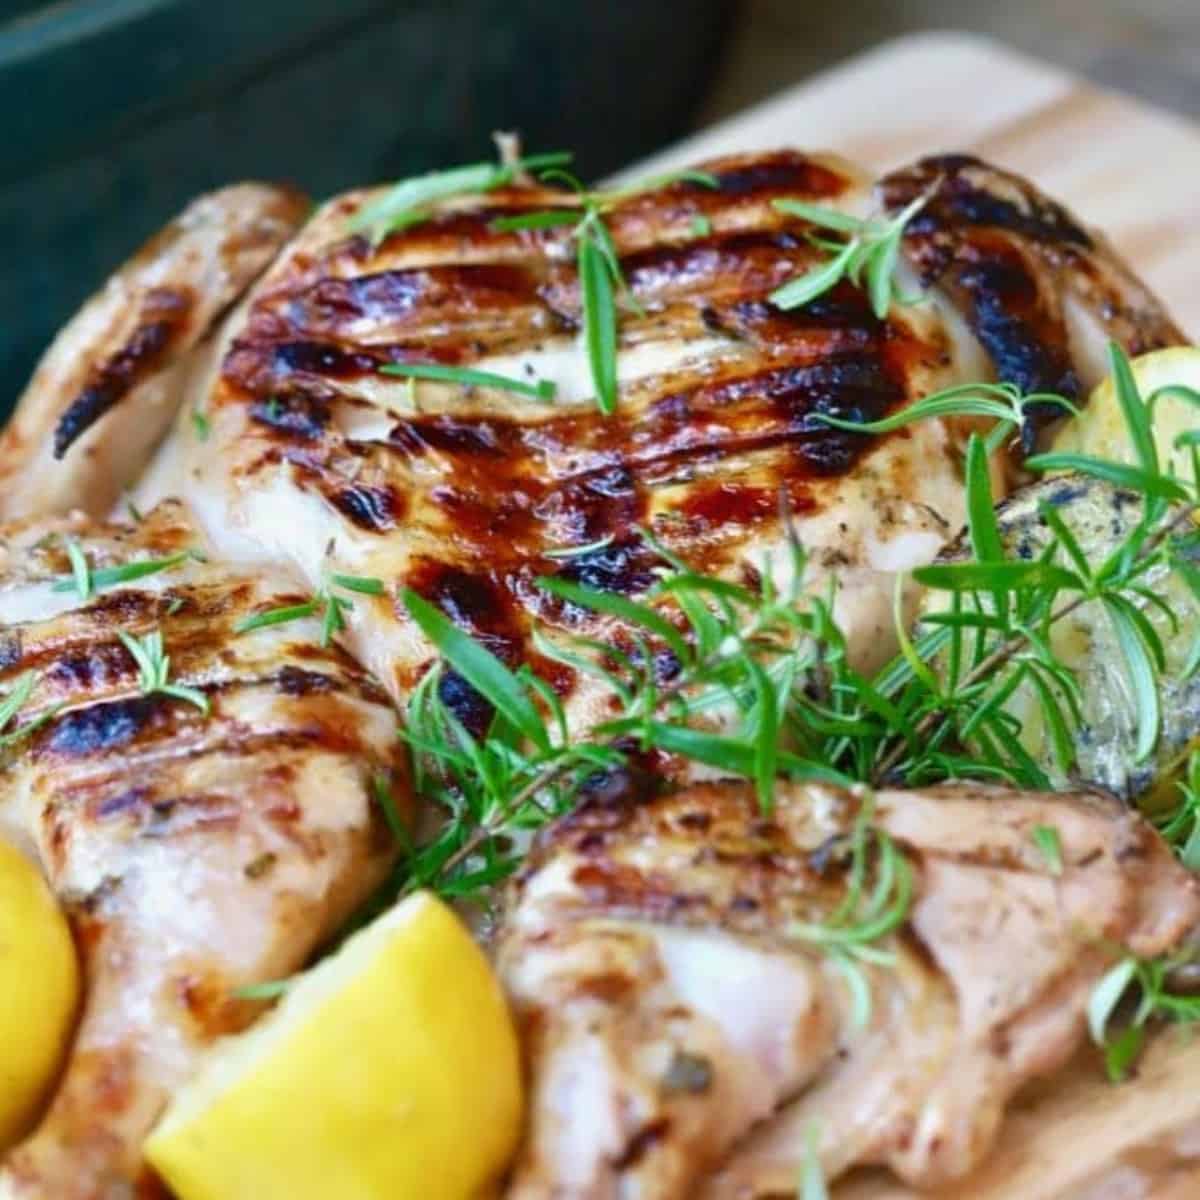 Grilled spatchcock chicken topped with sprigs of rosemary and sliced lemons.